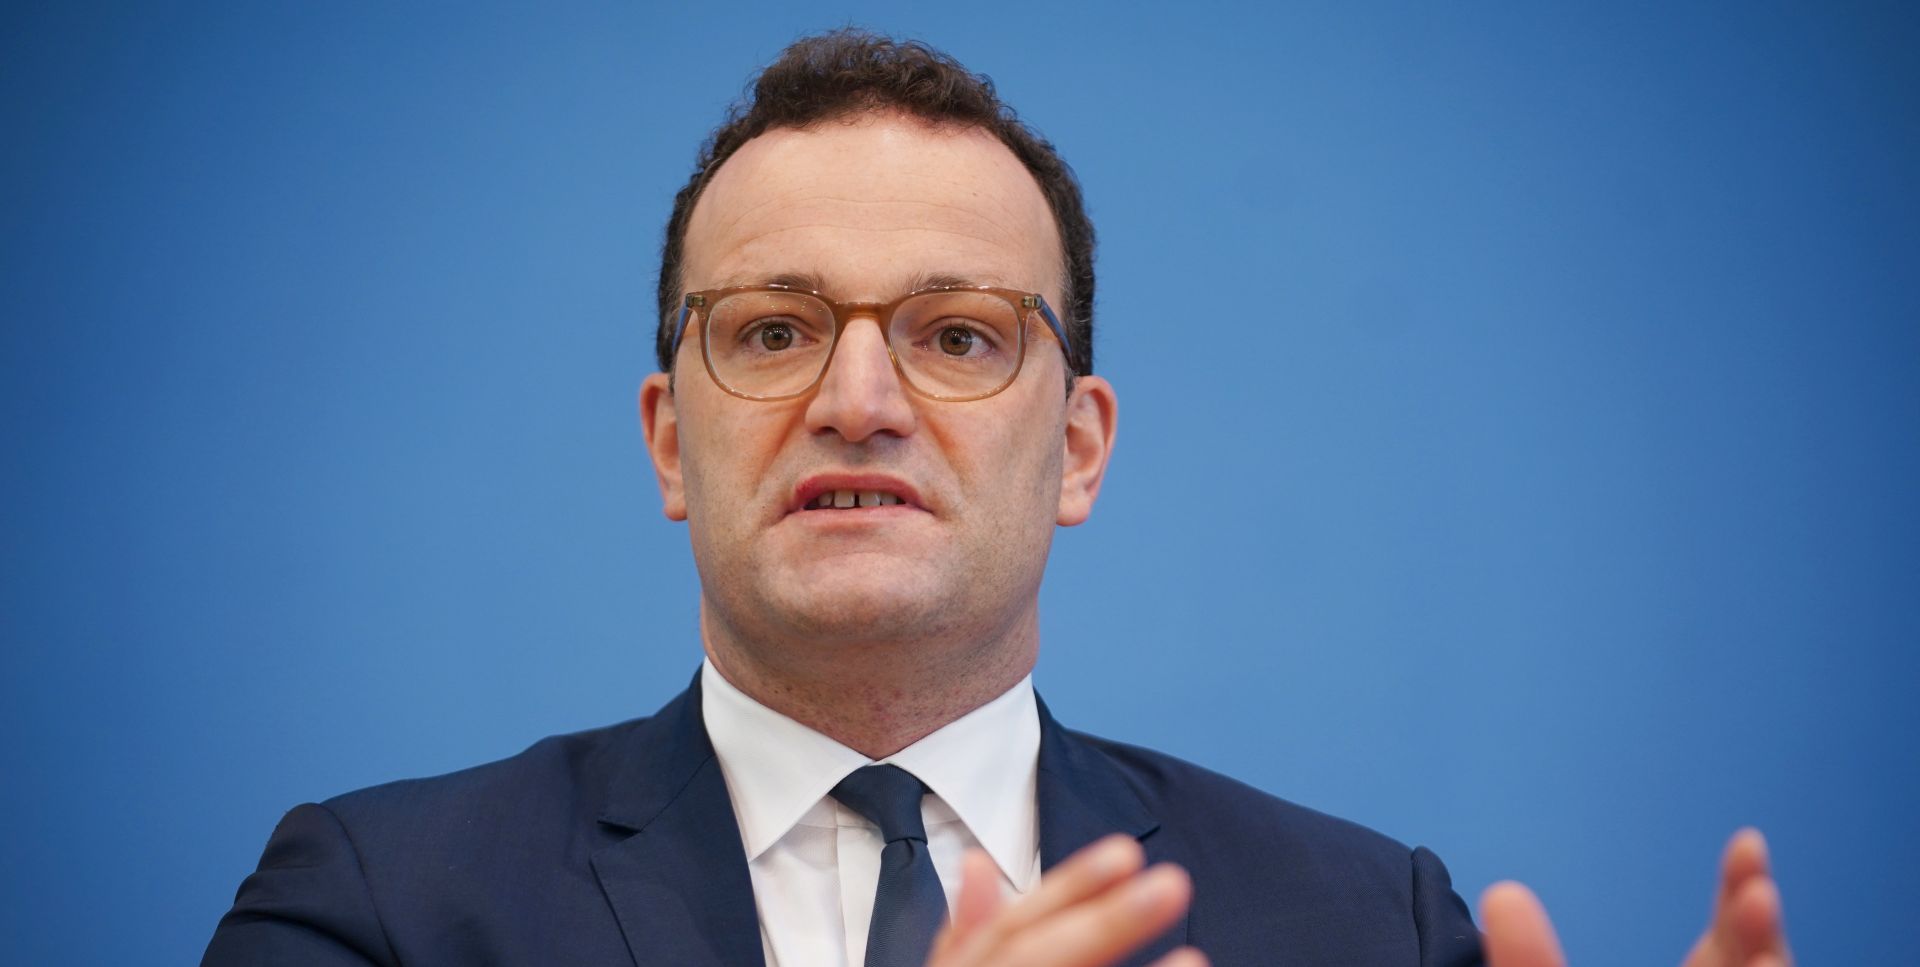 epa08762343 (FILE) - German Health Minister Jens Spahn speaks during a press conference at the house of the federal press conference (Haus der Bundespressekonferenz) in Berlin, Germany, 23 September 2020 (reissued 21 October 2020). According to the German Health Ministry, Spahn has tested positive for coronavirus.  EPA/CLEMENS BILAN